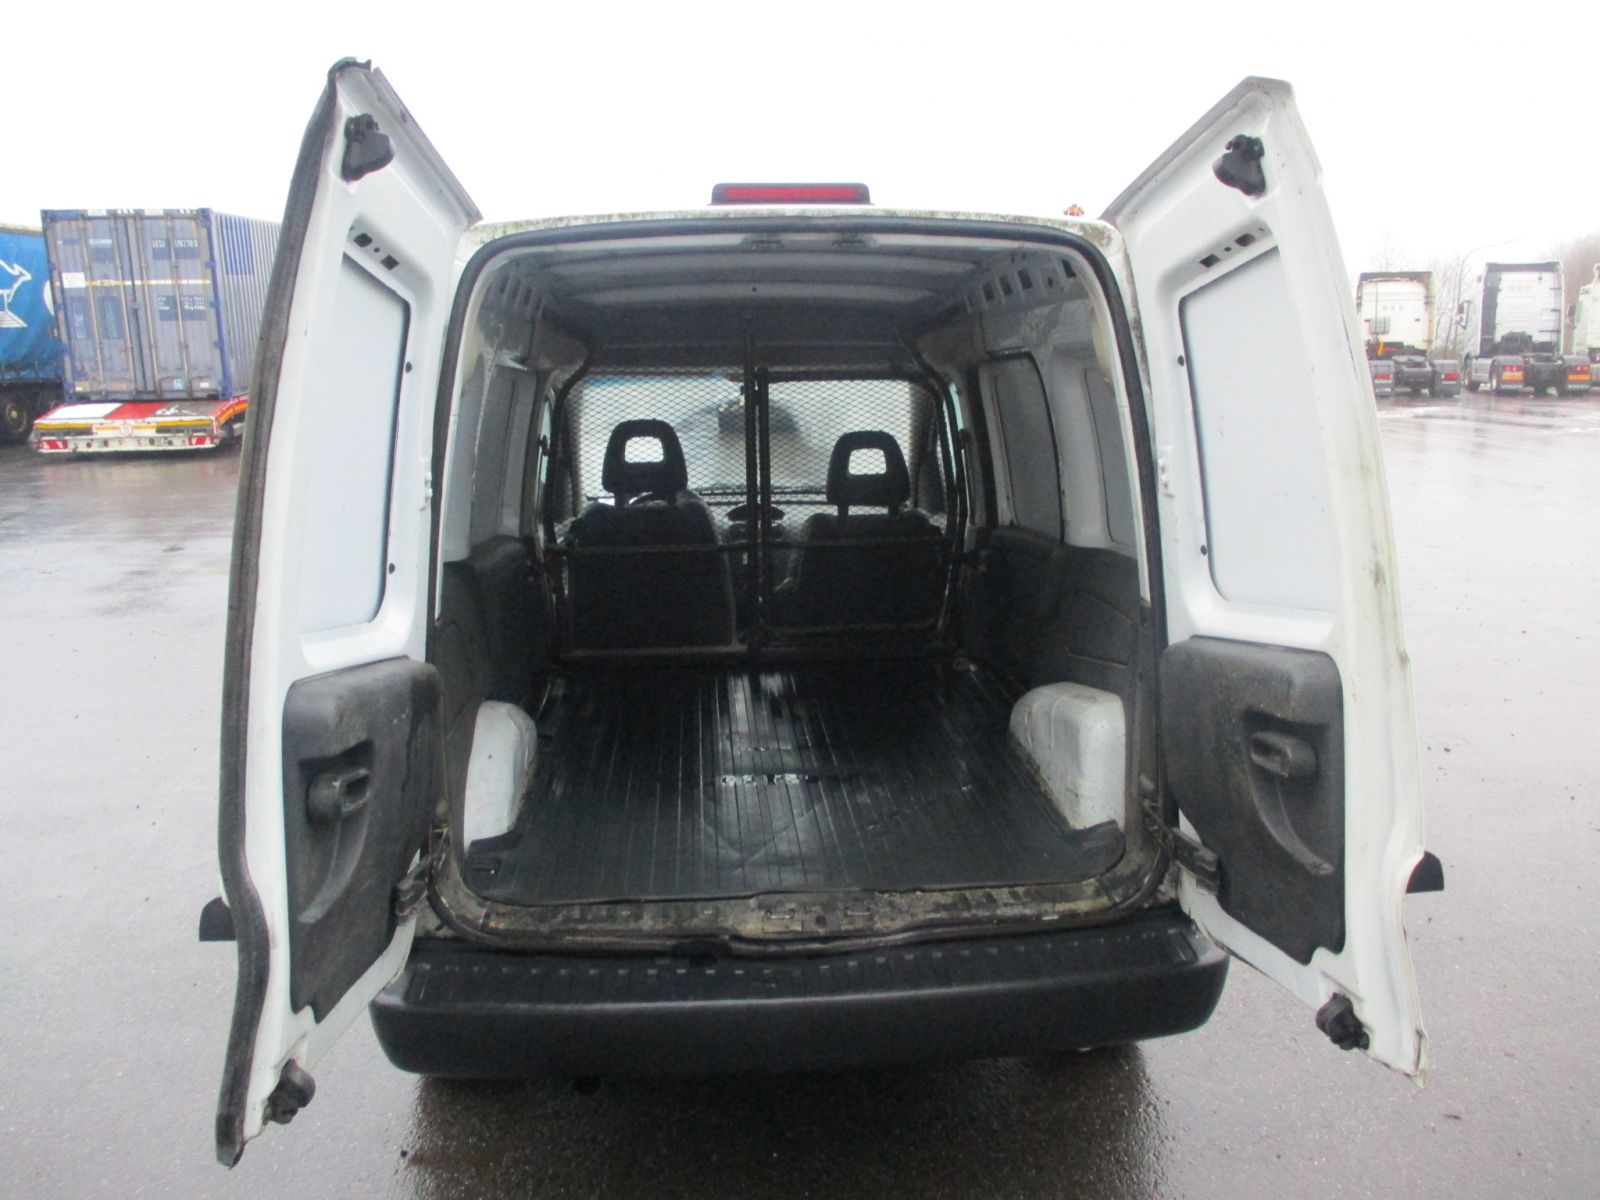 Second hand sale Diverse - OPEL Combo 1.3 CDTI  FOURGON (Belgique - Europe) - Houffalize Trading s.a.